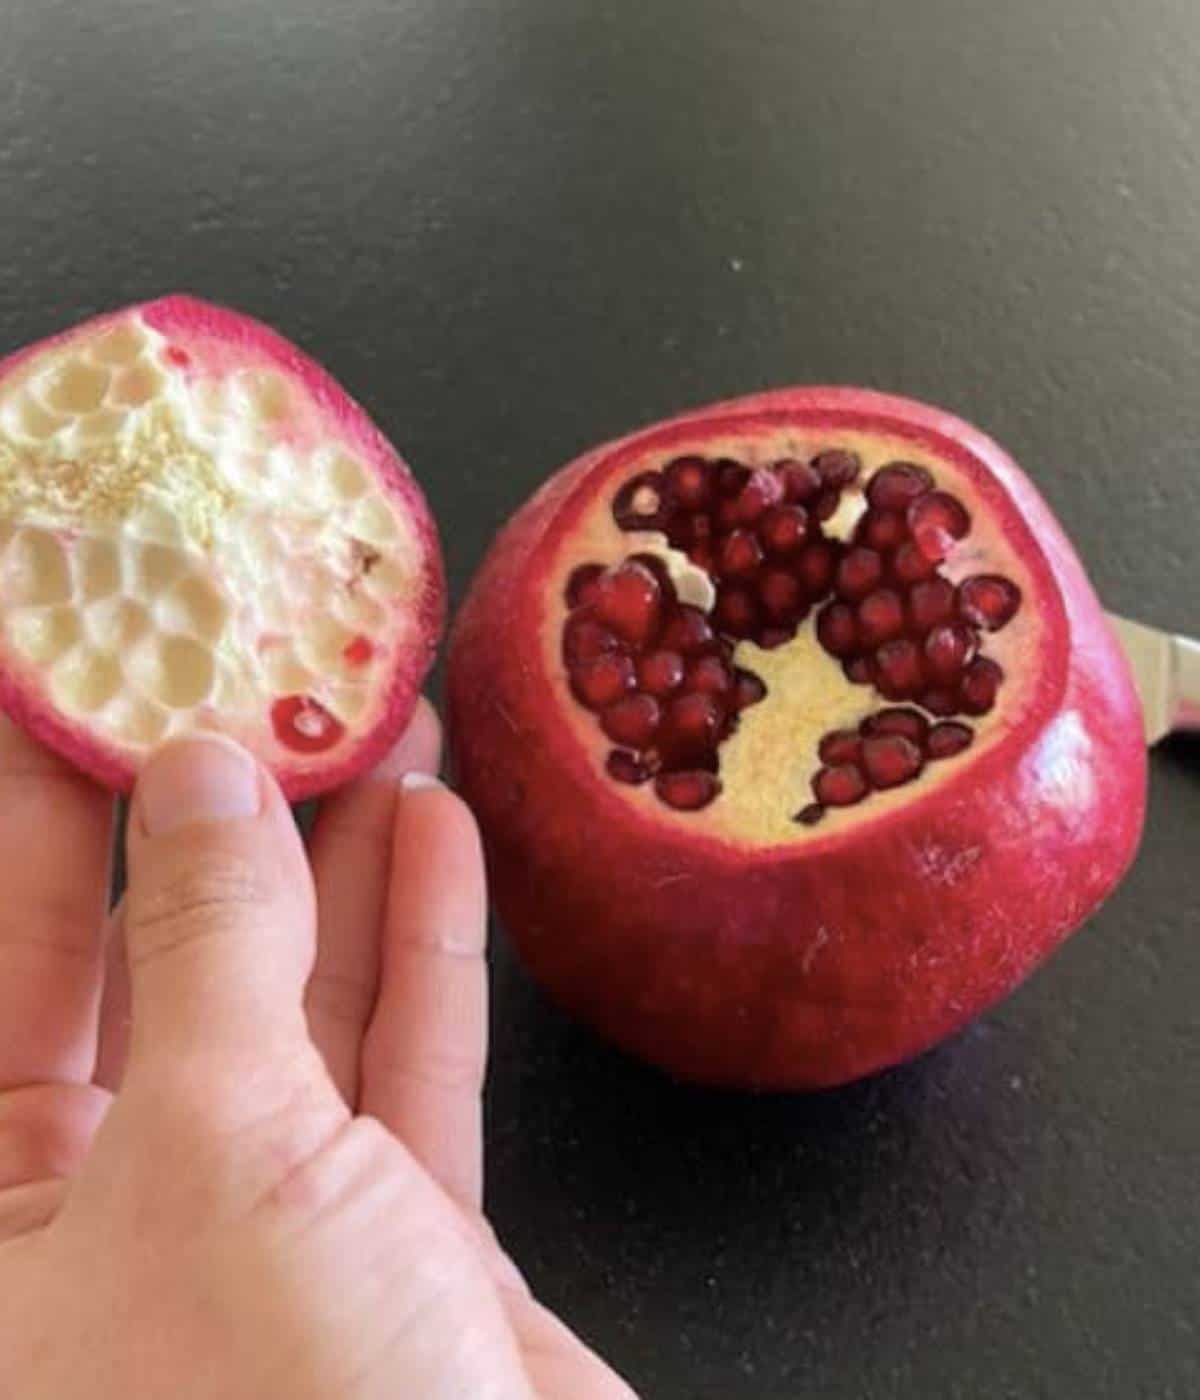 Hand holding top lid of pomegranate.